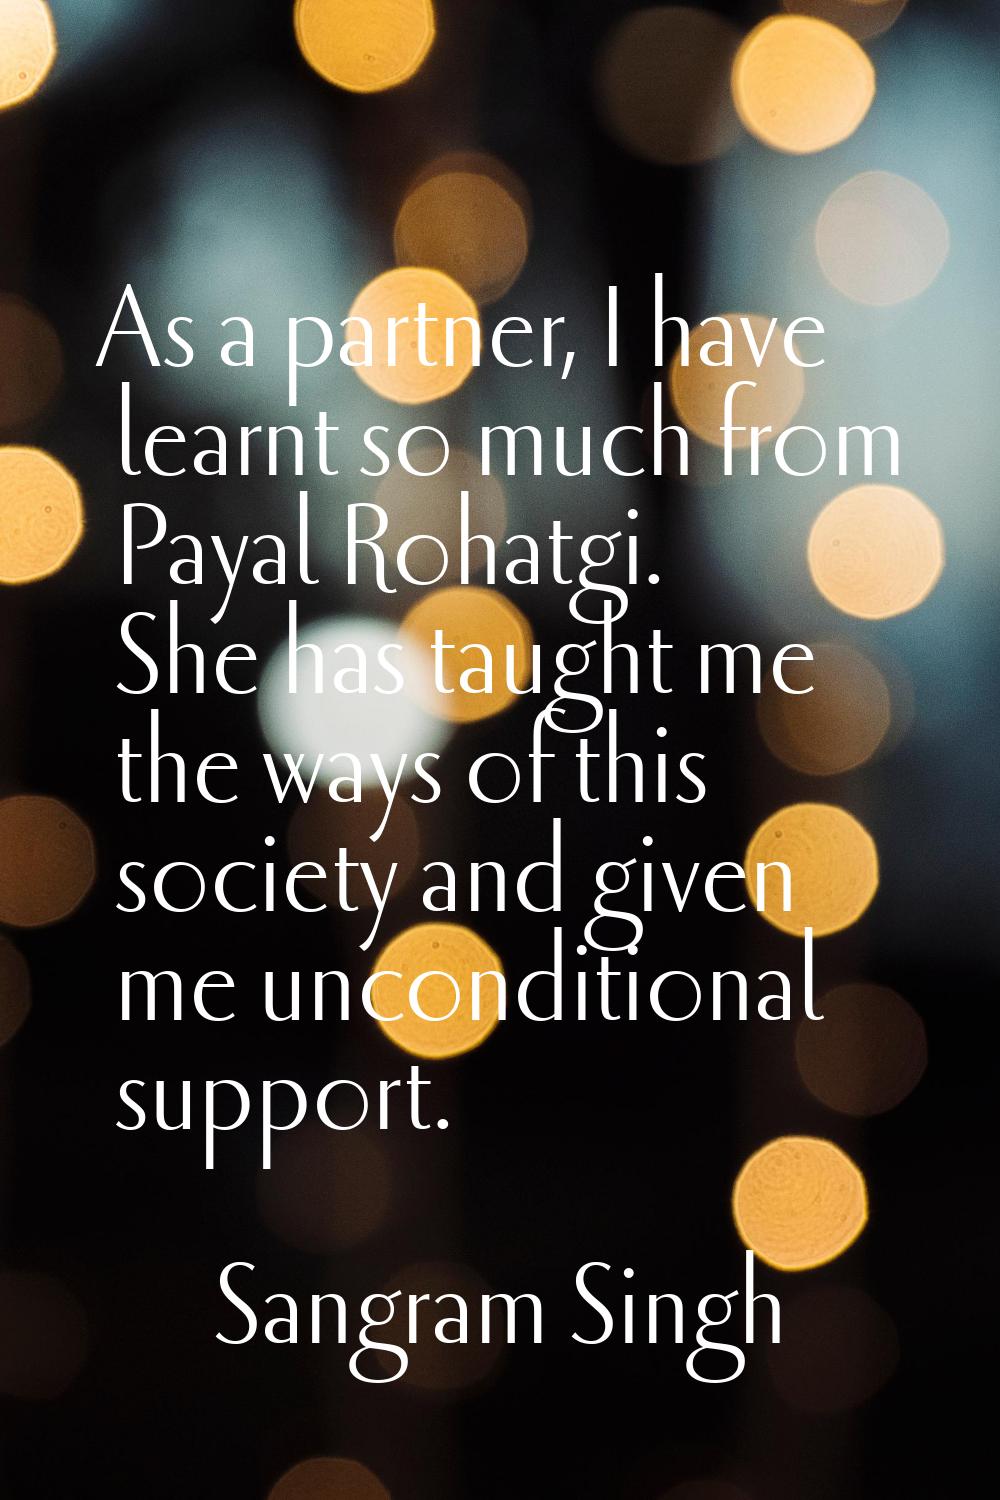 As a partner, I have learnt so much from Payal Rohatgi. She has taught me the ways of this society 